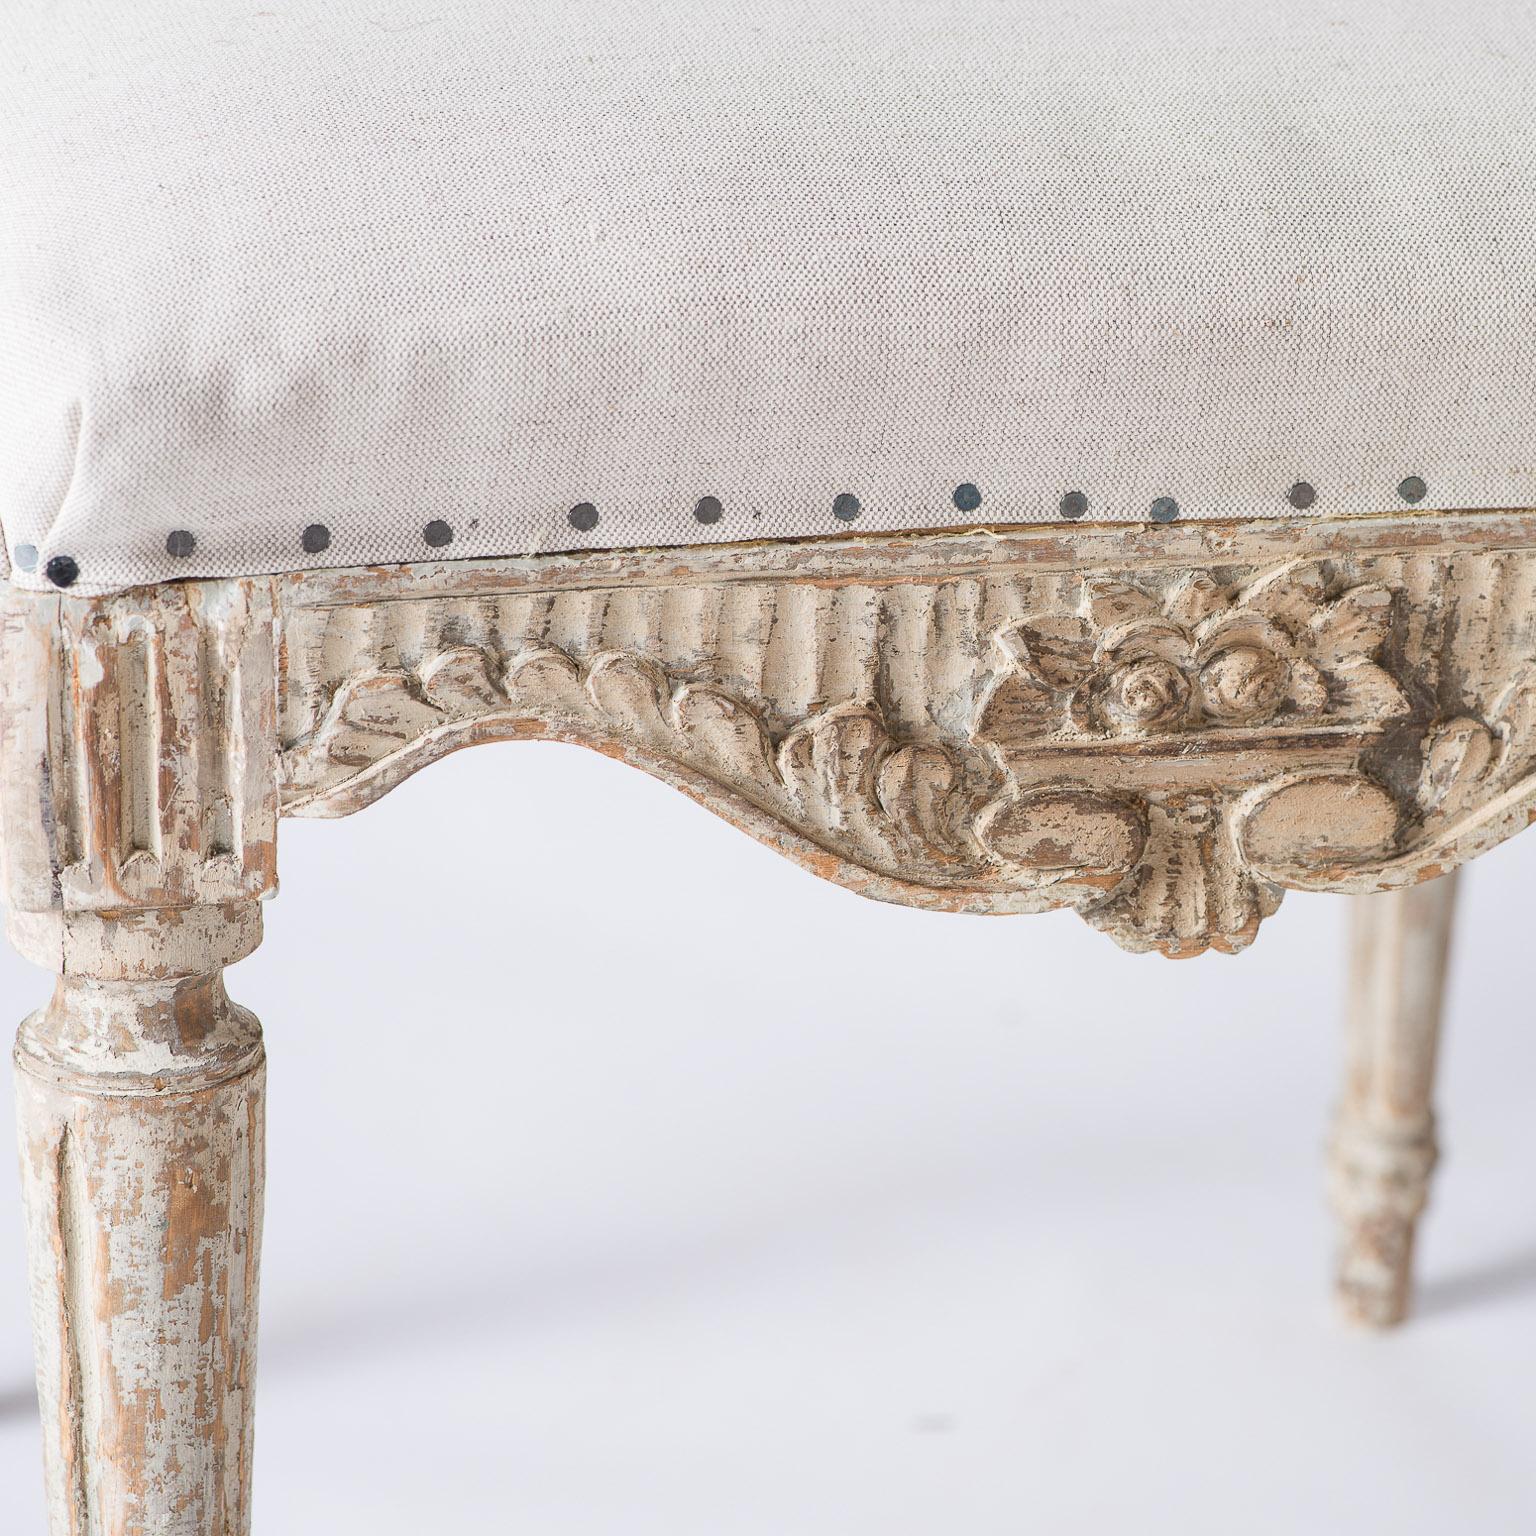 These footstools of the Gustavian period are unusual due to their generous size and elaborate carvings. They are finished on all four sides with a richly carved flower motif flanked by scrolls in the form of leaves and ending in elegant reeded legs.